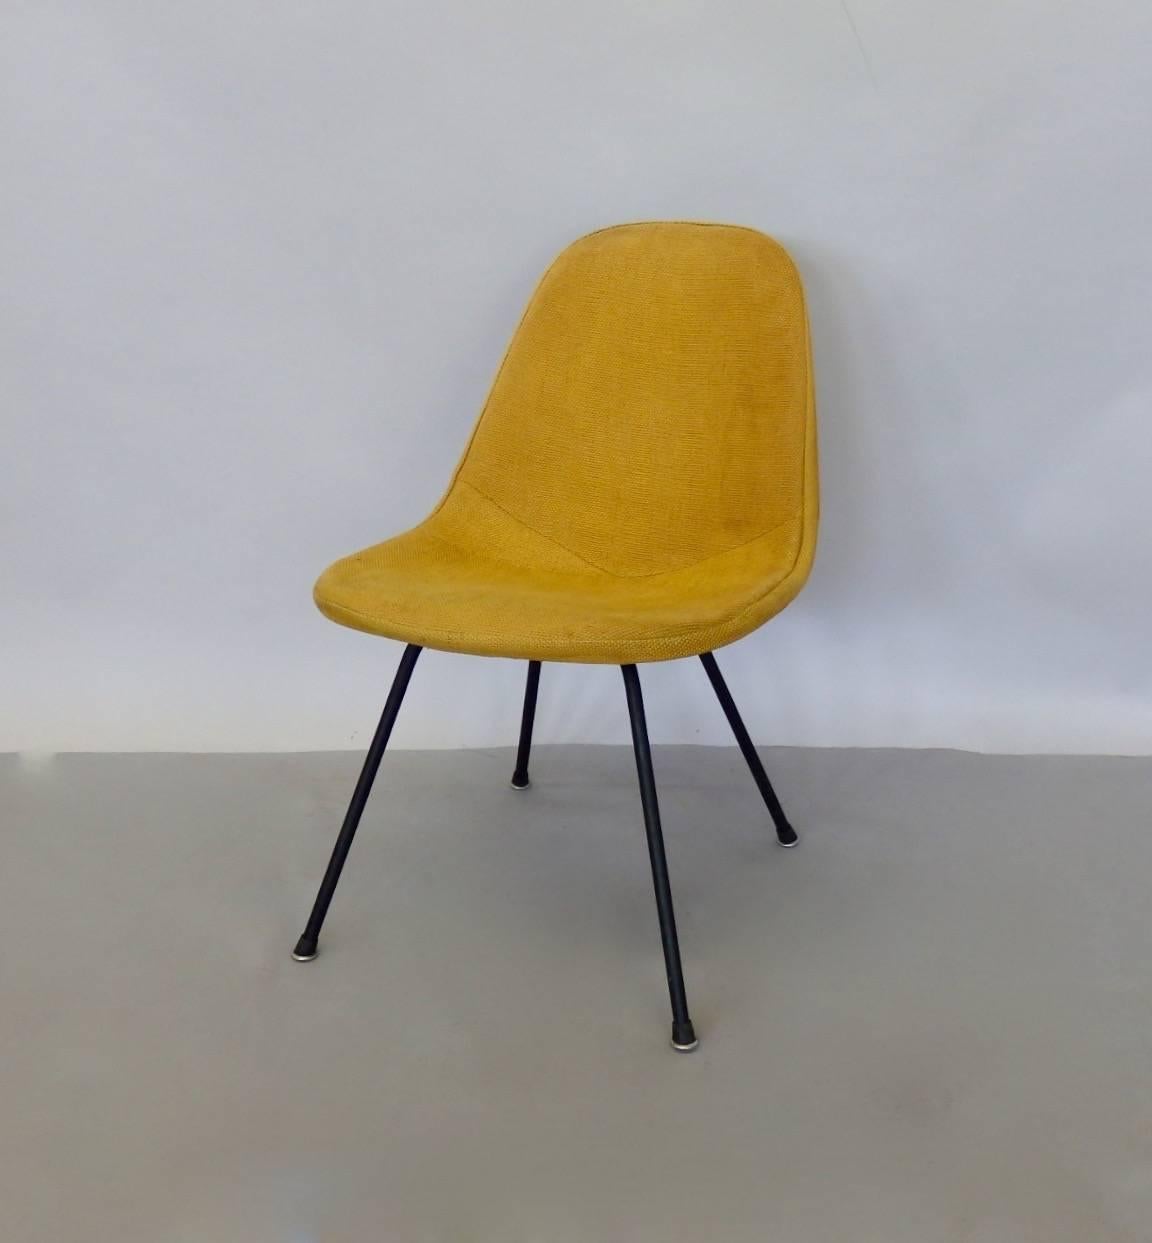 Charles and Ray Eames for Herman Miller DKR lounge chair. The chair is earlier production evidenced by the solid steel 